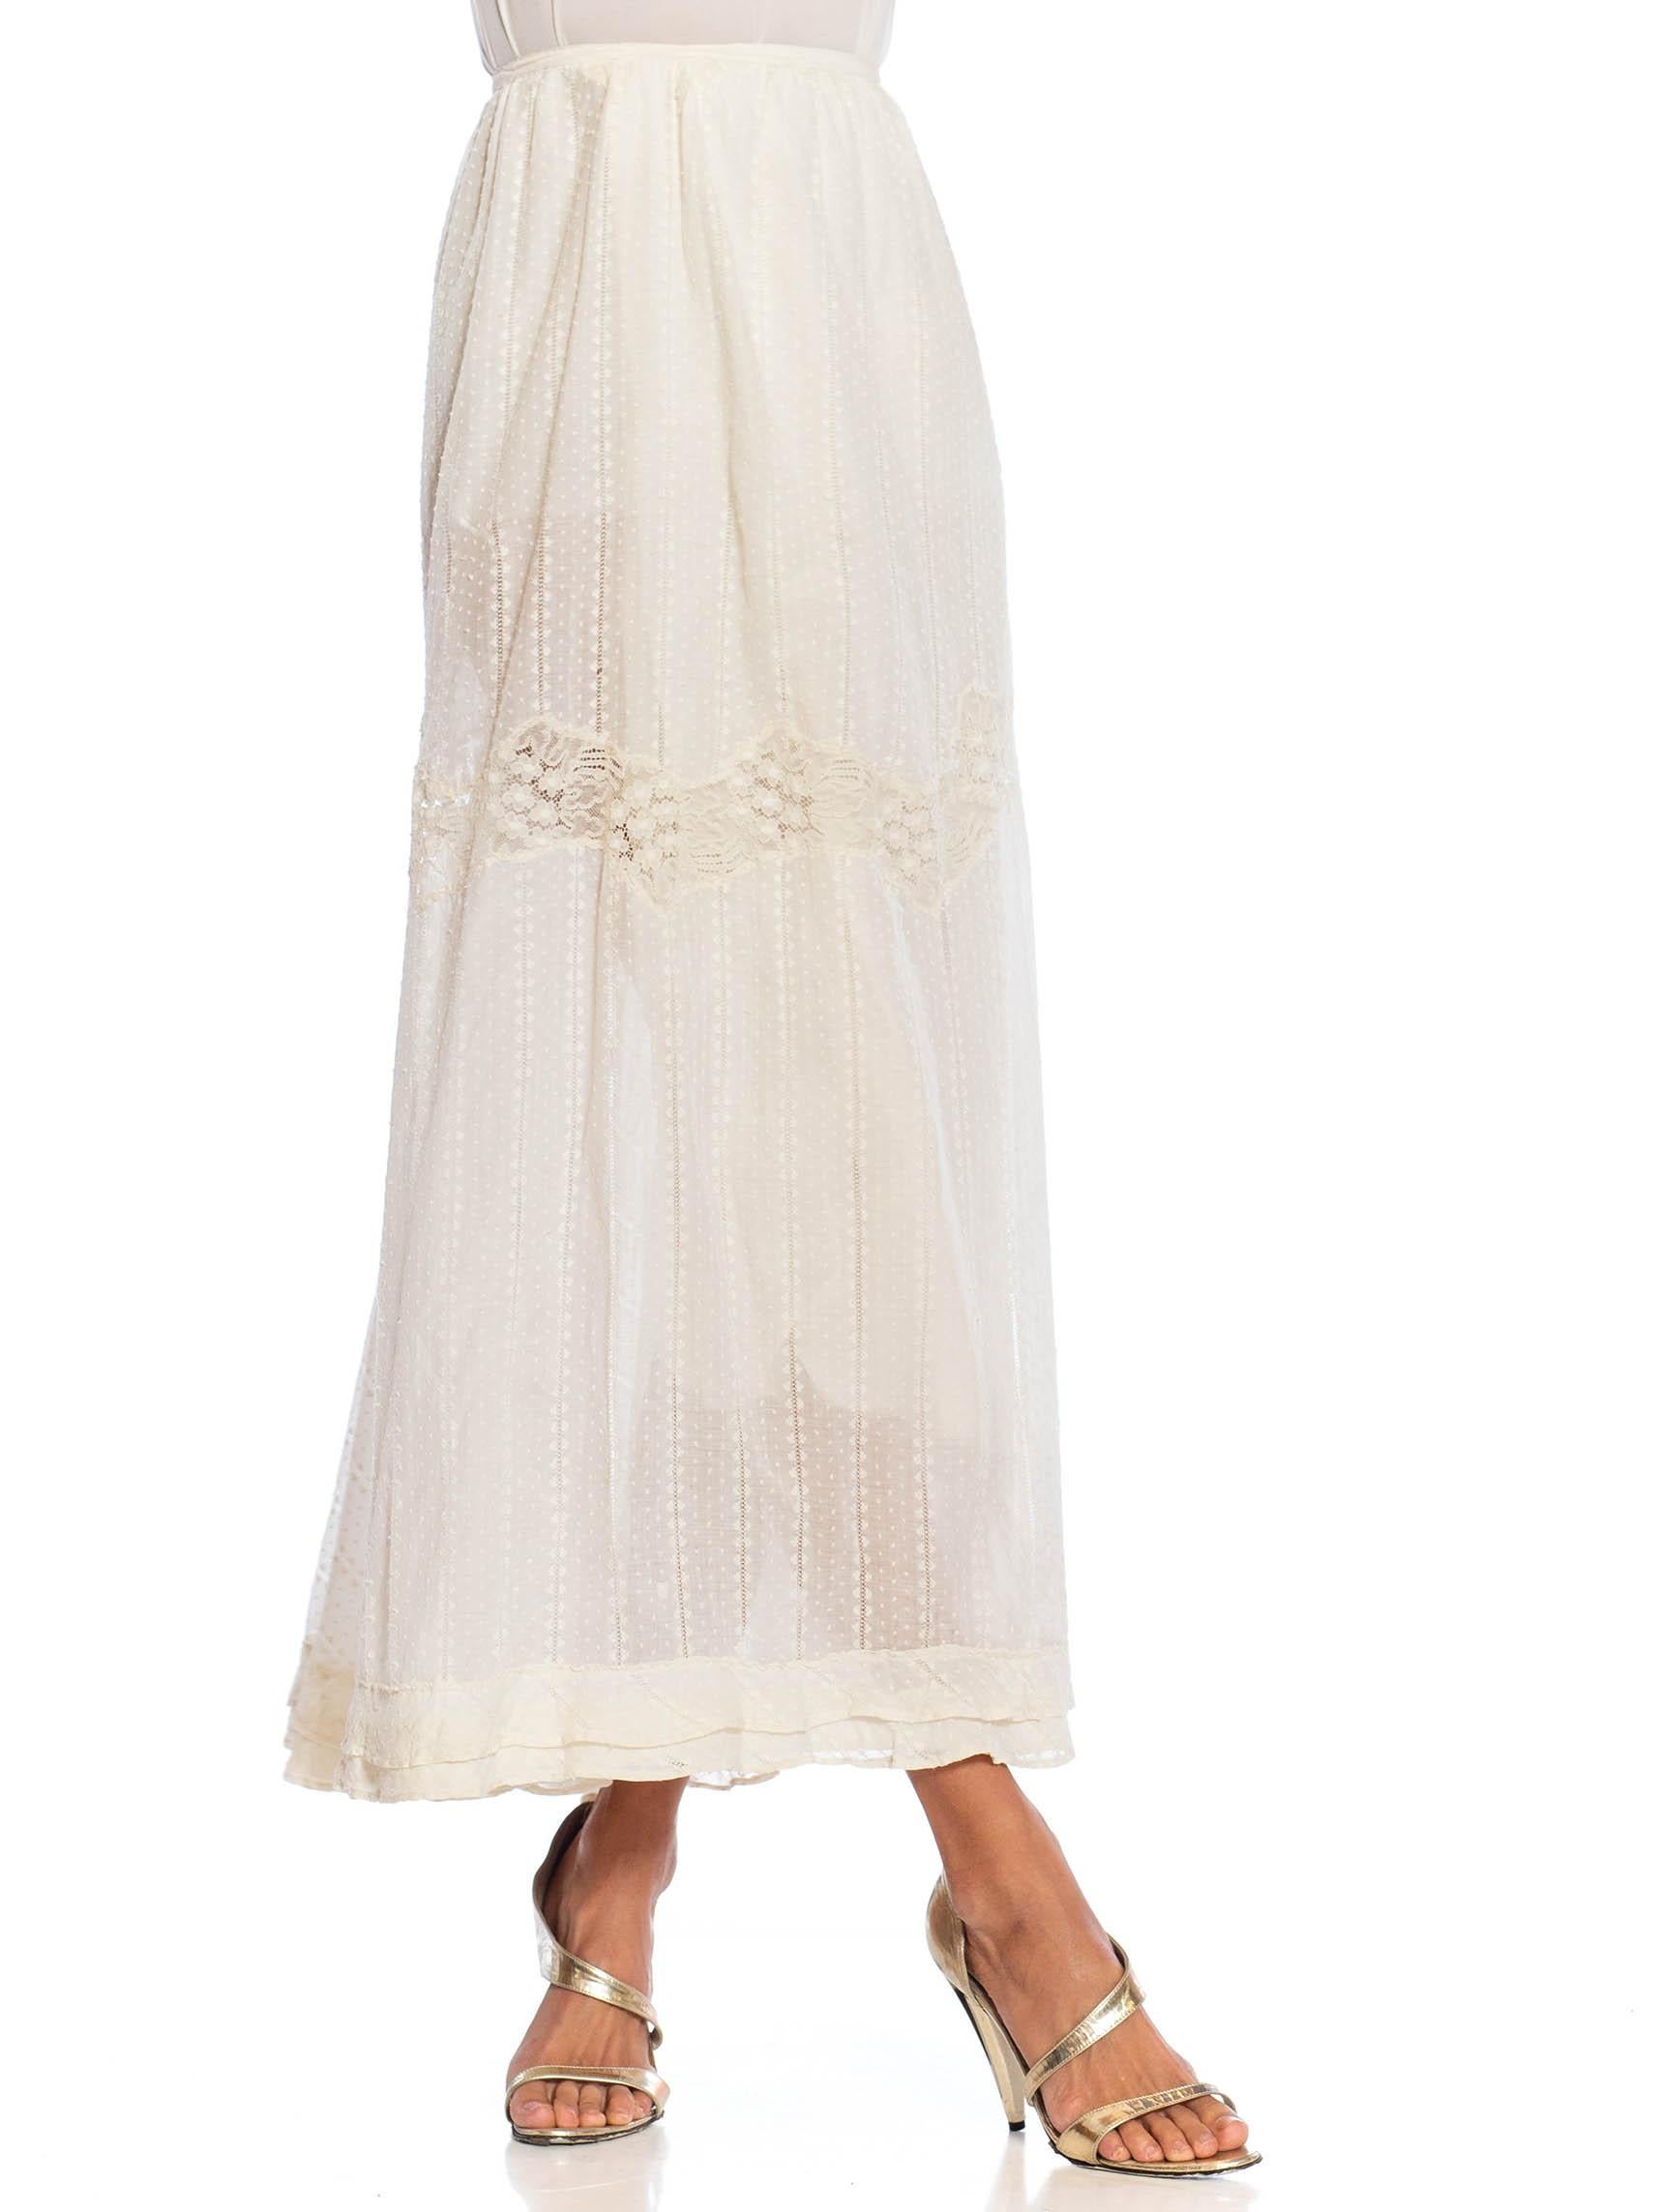 Victorian Ivory Organic Cotton & Lace Trimmed Skirt For Sale 6